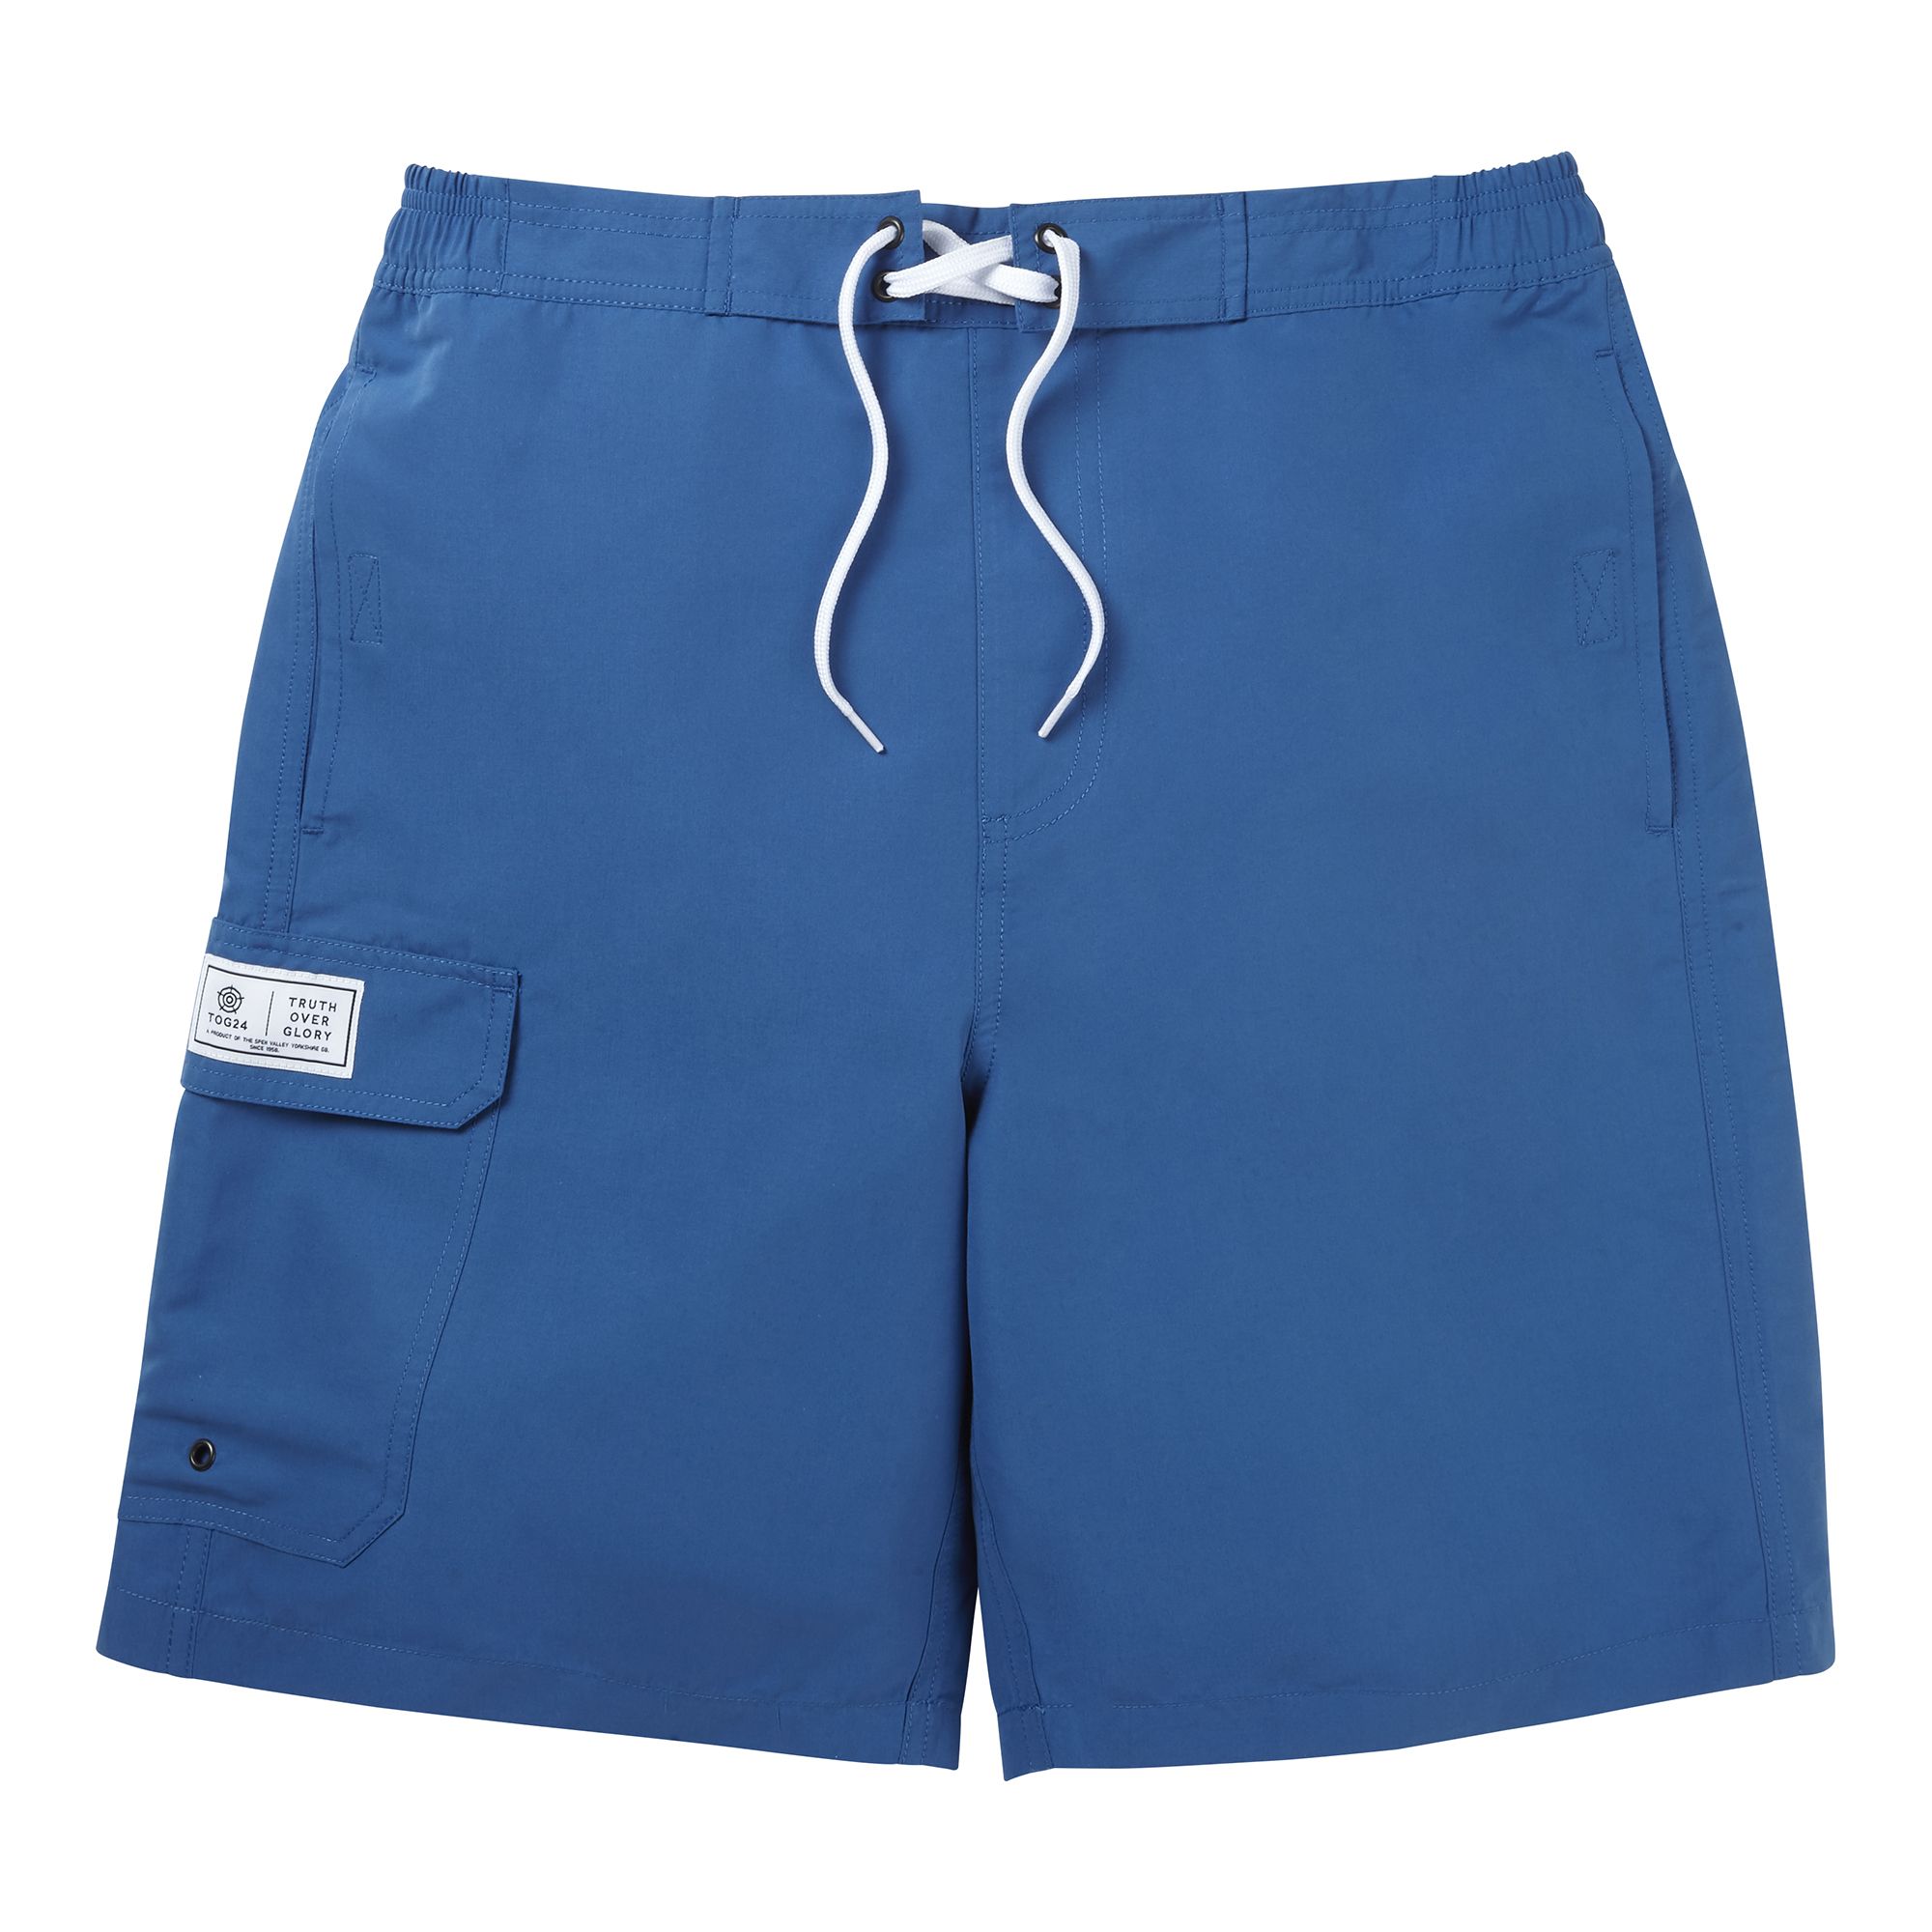 Our classic board shorts in plain colours inspired by the cliffs and seascapes of the Yorkshire coastline. These versatile mens swimming shorts with an inner mesh brief are  perfect for holidays. You can go for an early morning dip, and they’ll be dry in time to wear as a pair of shorts to breakfast. The semi-elasticated waist is really comfortable to wear all day. Just throw on a T-shirt and you’ll be ready for a day of lounging around by the pool, seeing the sights or even out for dinner. Cut from a quick-drying high performance fabric that repels water, they don’t weigh you down when you swim and the patch pocket has a neat eyelet drainage hole at the bottom to let water out. Surfer styling includes a drawcord detail at the waist, mesh-lined side pockets, hidden back pocket and a woven TOG24 label on the leg pocket.